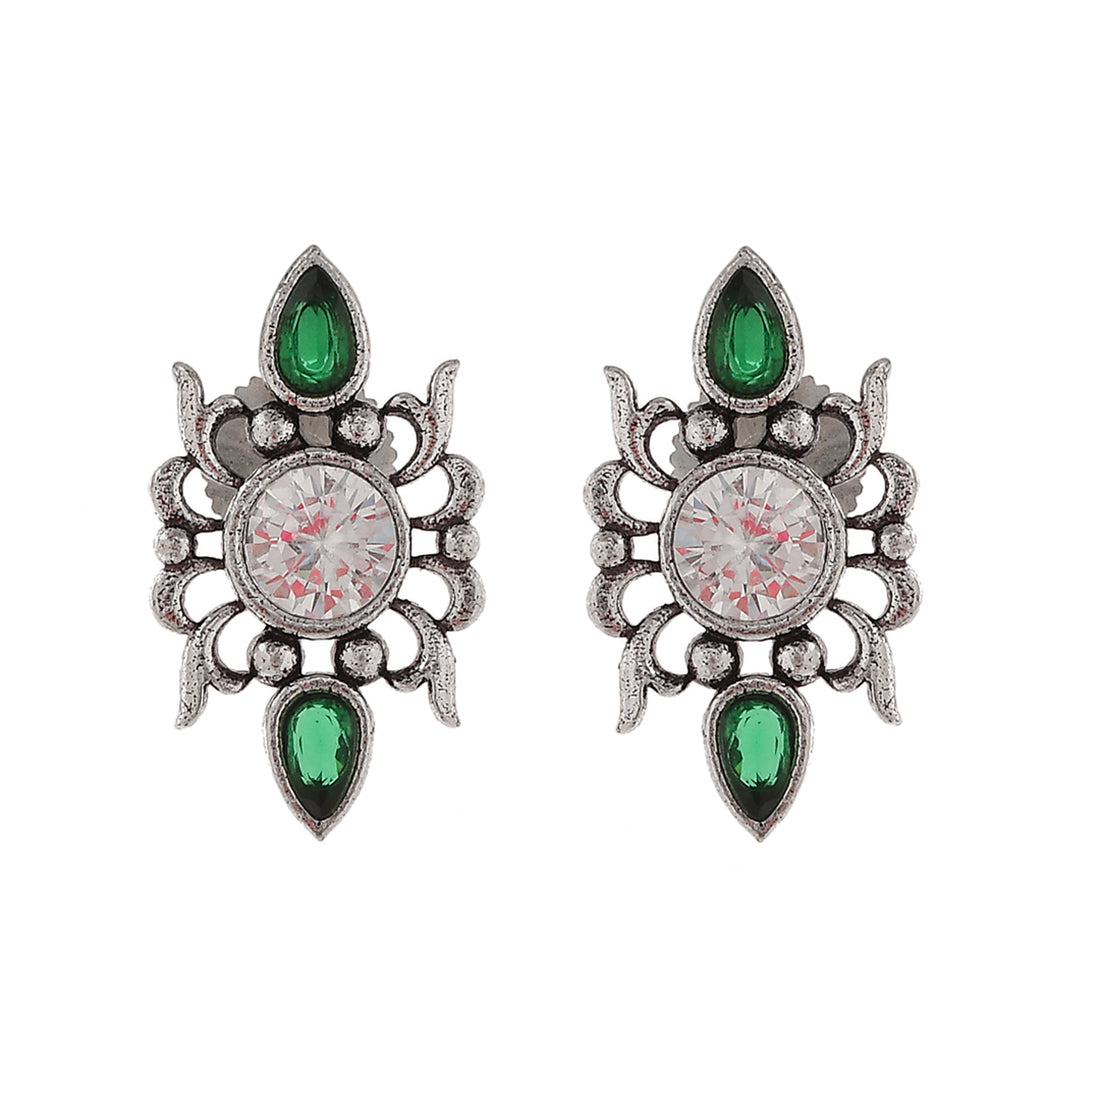 Women's Abharan Casual White And Green Stones Stud Earrings - Voylla